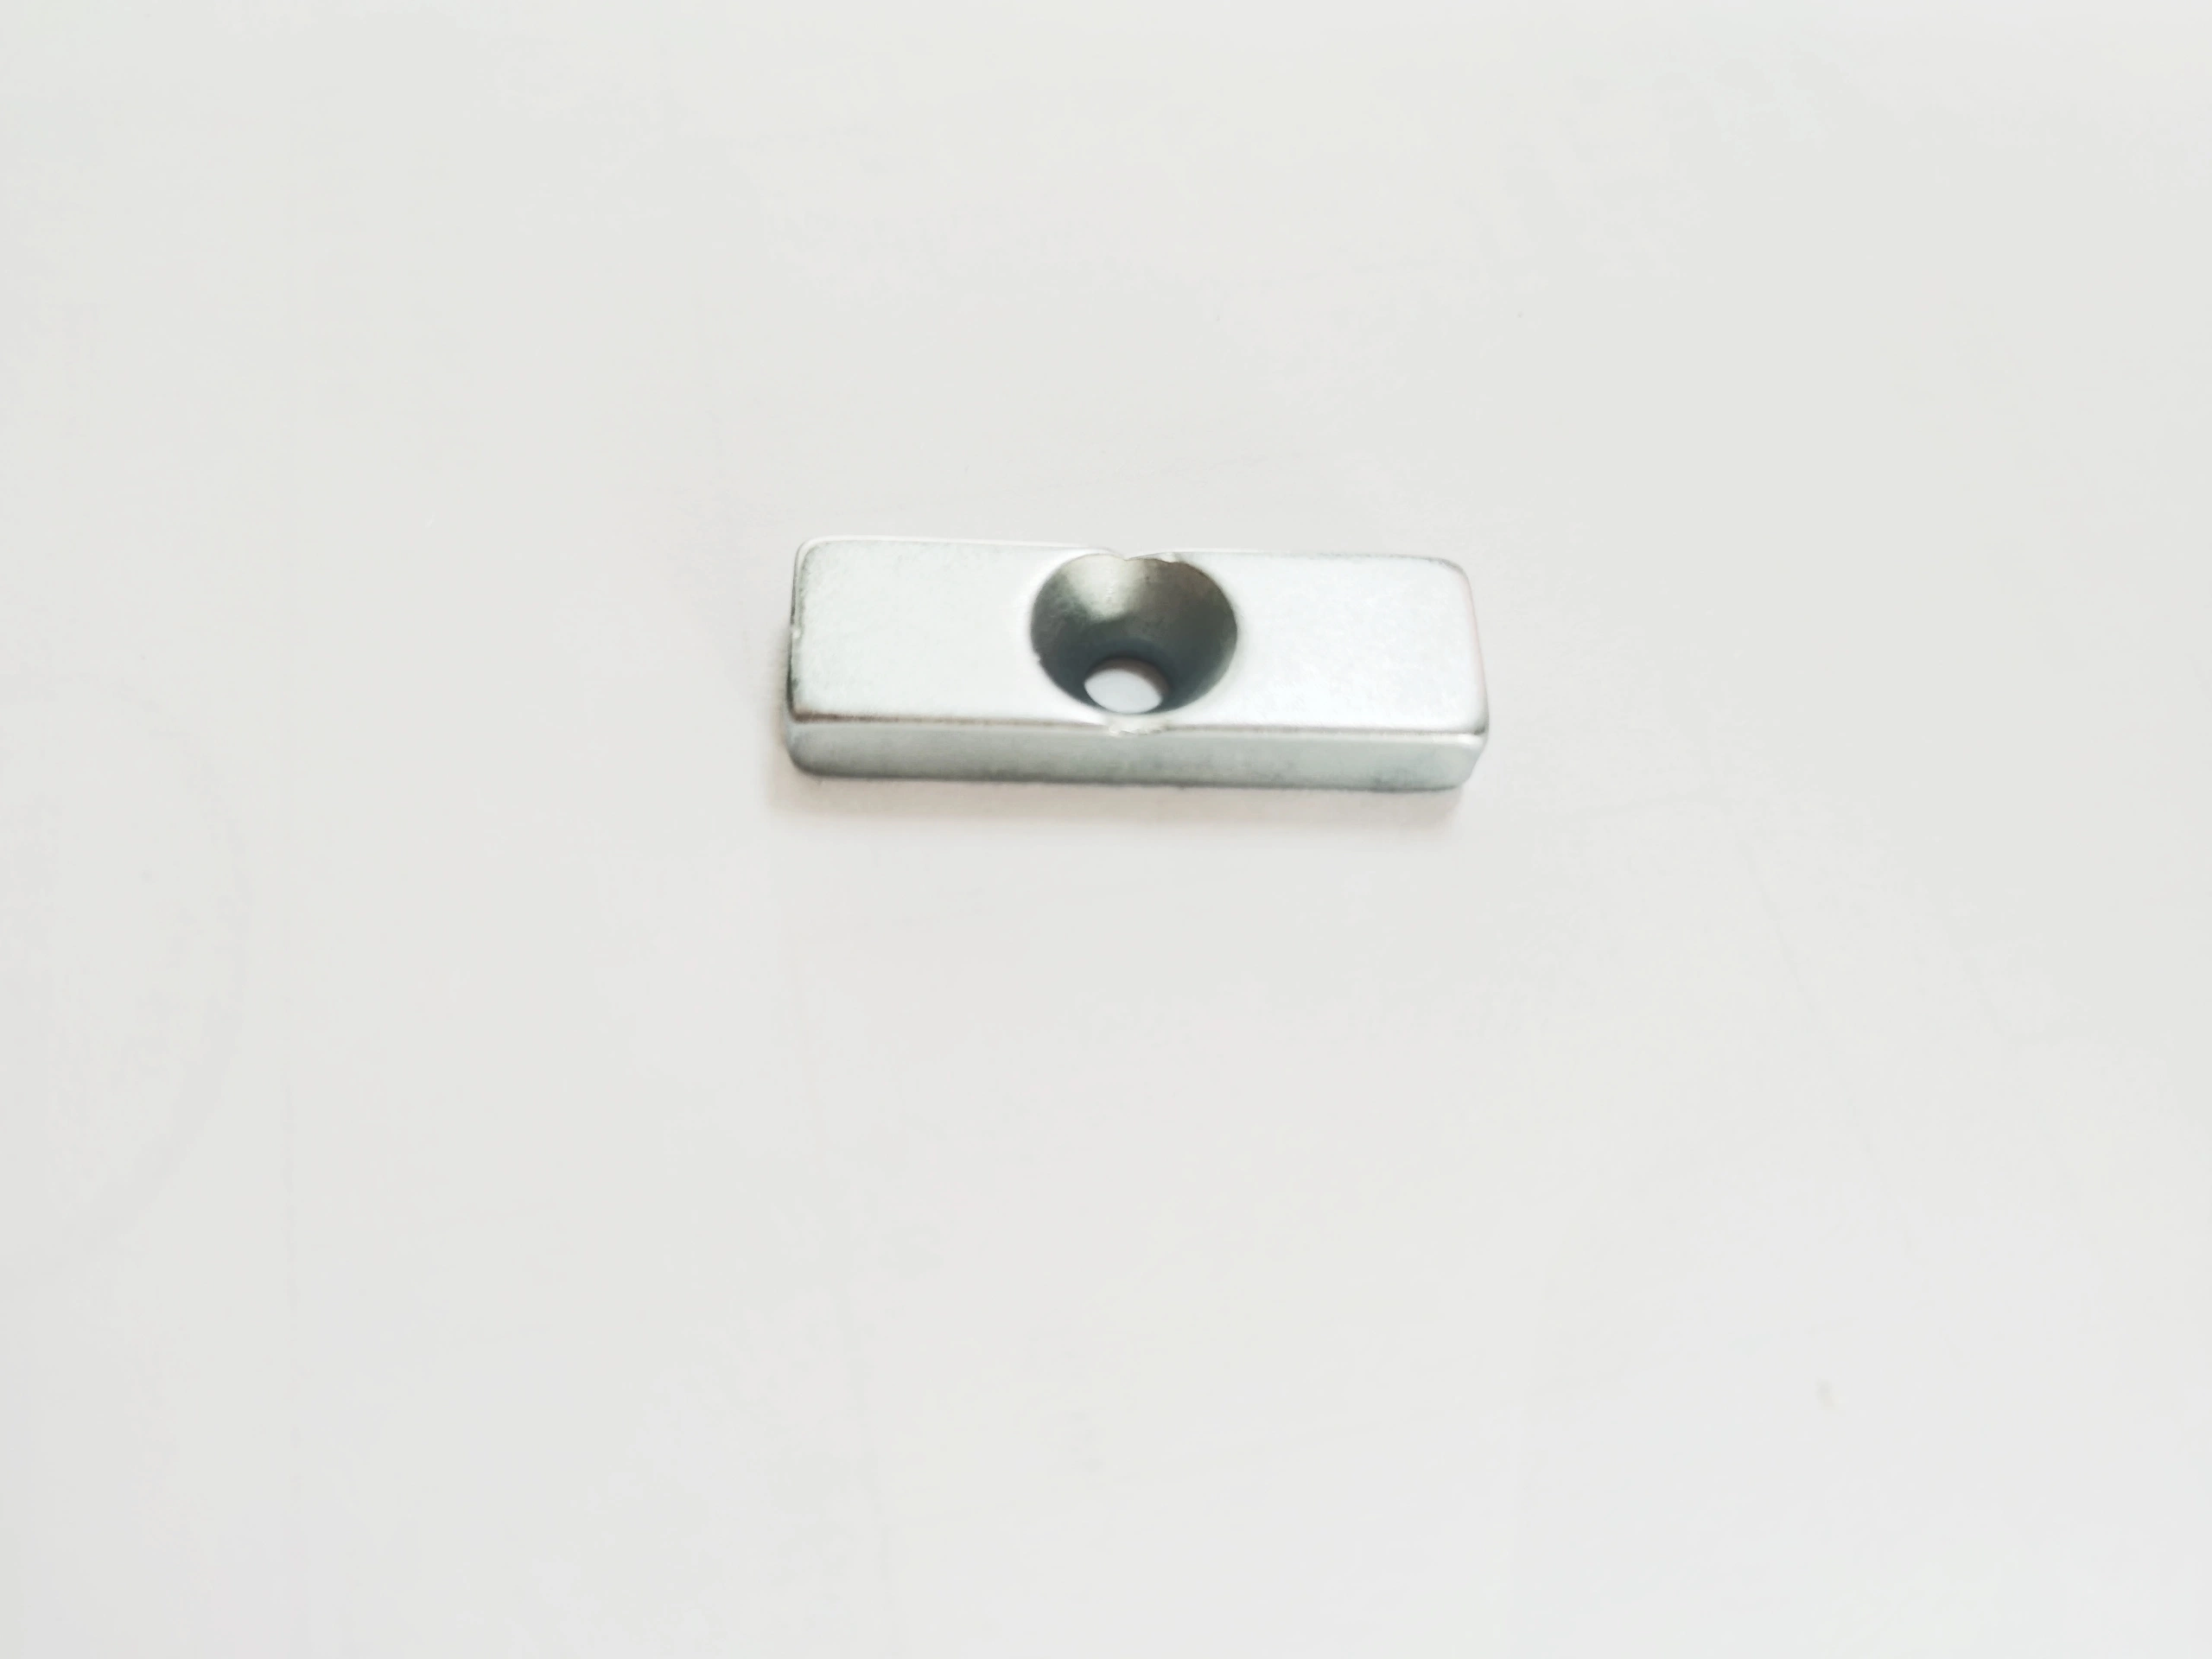 Sintered NdFeB Neodymium Permanent Magnet Rectnagle Shape with Couter Sunk Hole